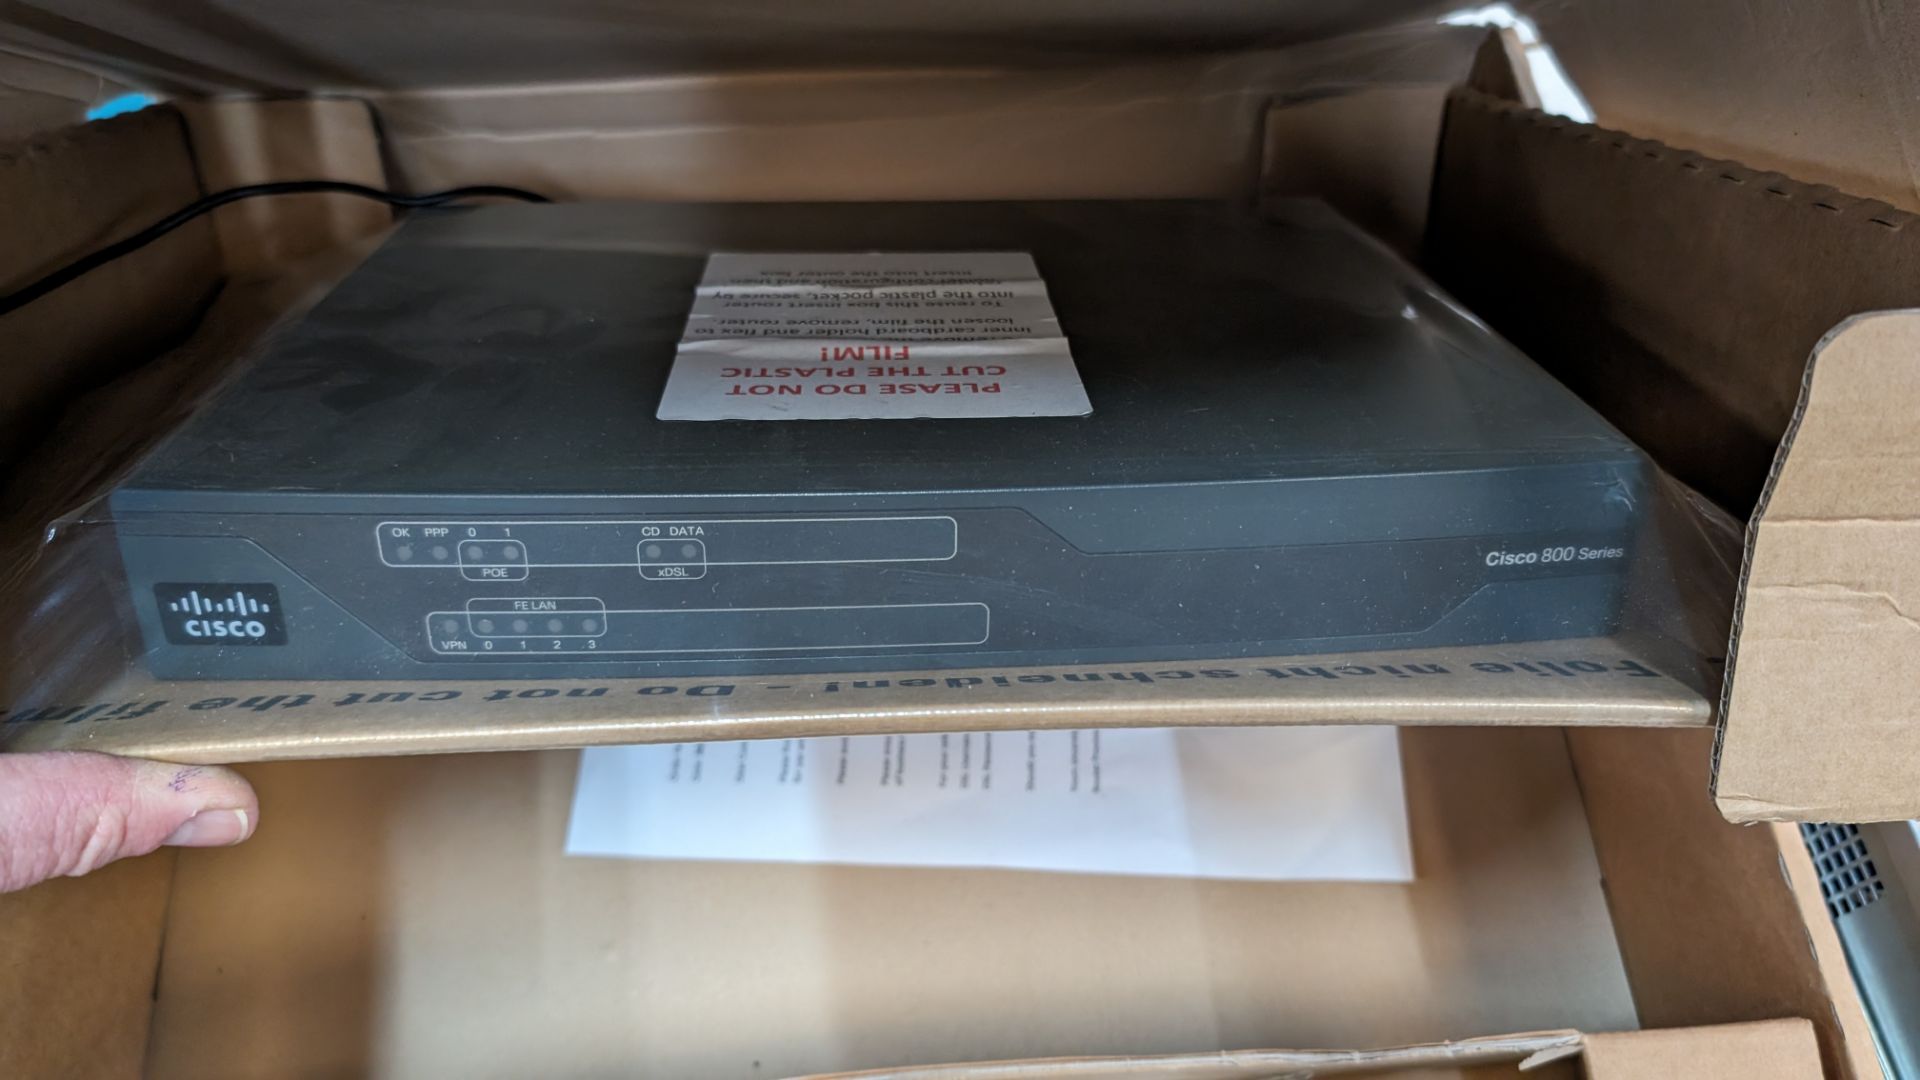 Cisco 887VAM broadband router including power pack & cables - appears to be new/unused - Image 3 of 8